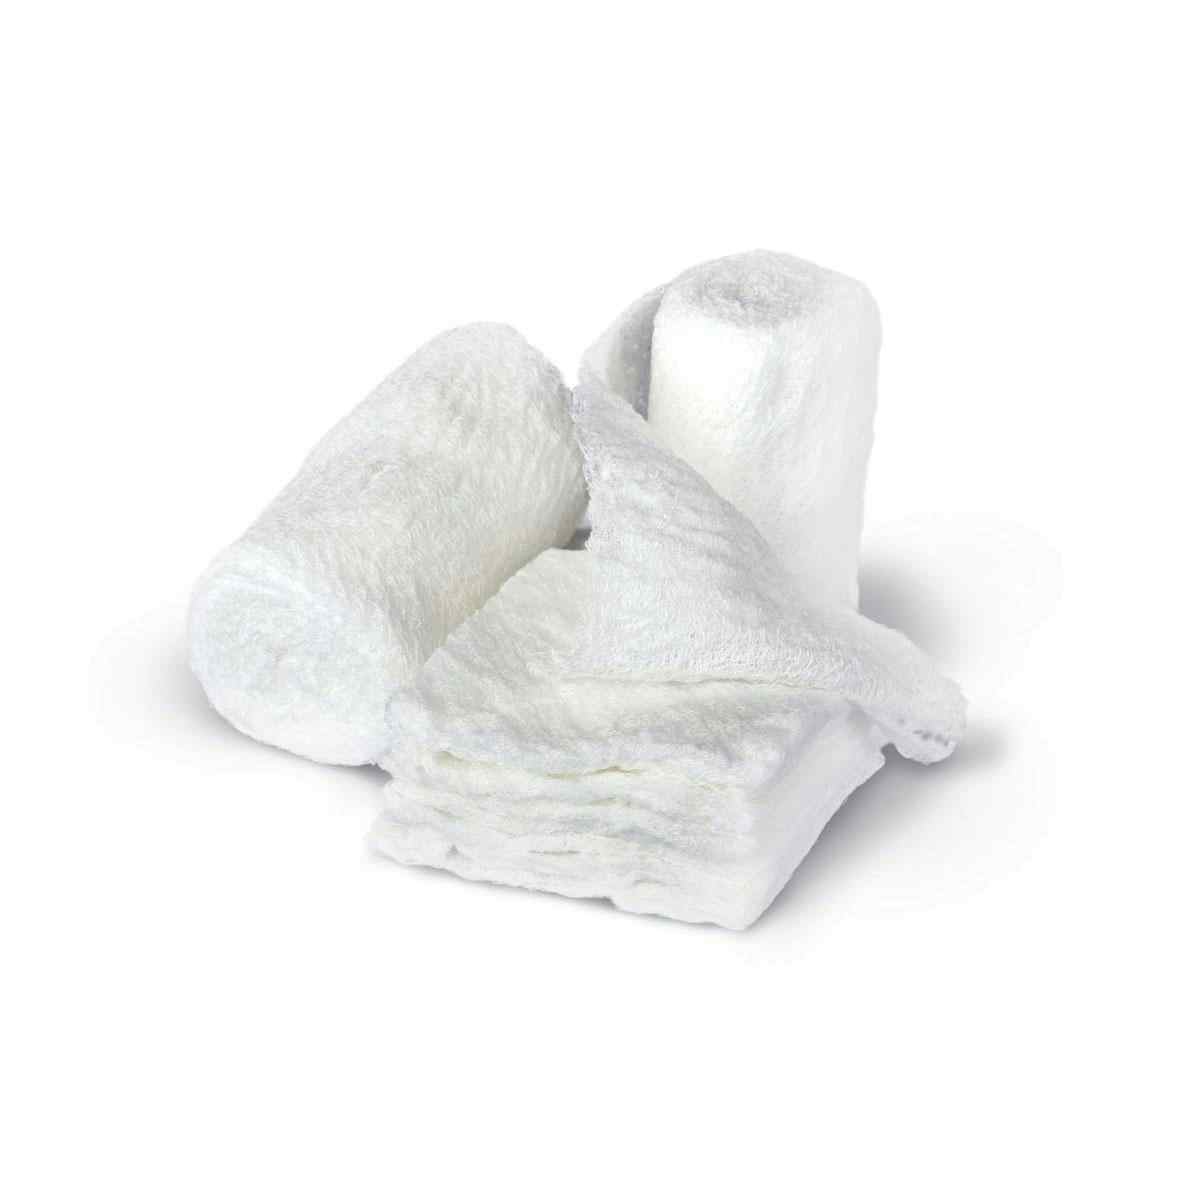 Medline Bulkee II Non-Sterile Cotton Gauze Bandages, NON25855P, 4.5" X 4.1 yd. - Pack of 5